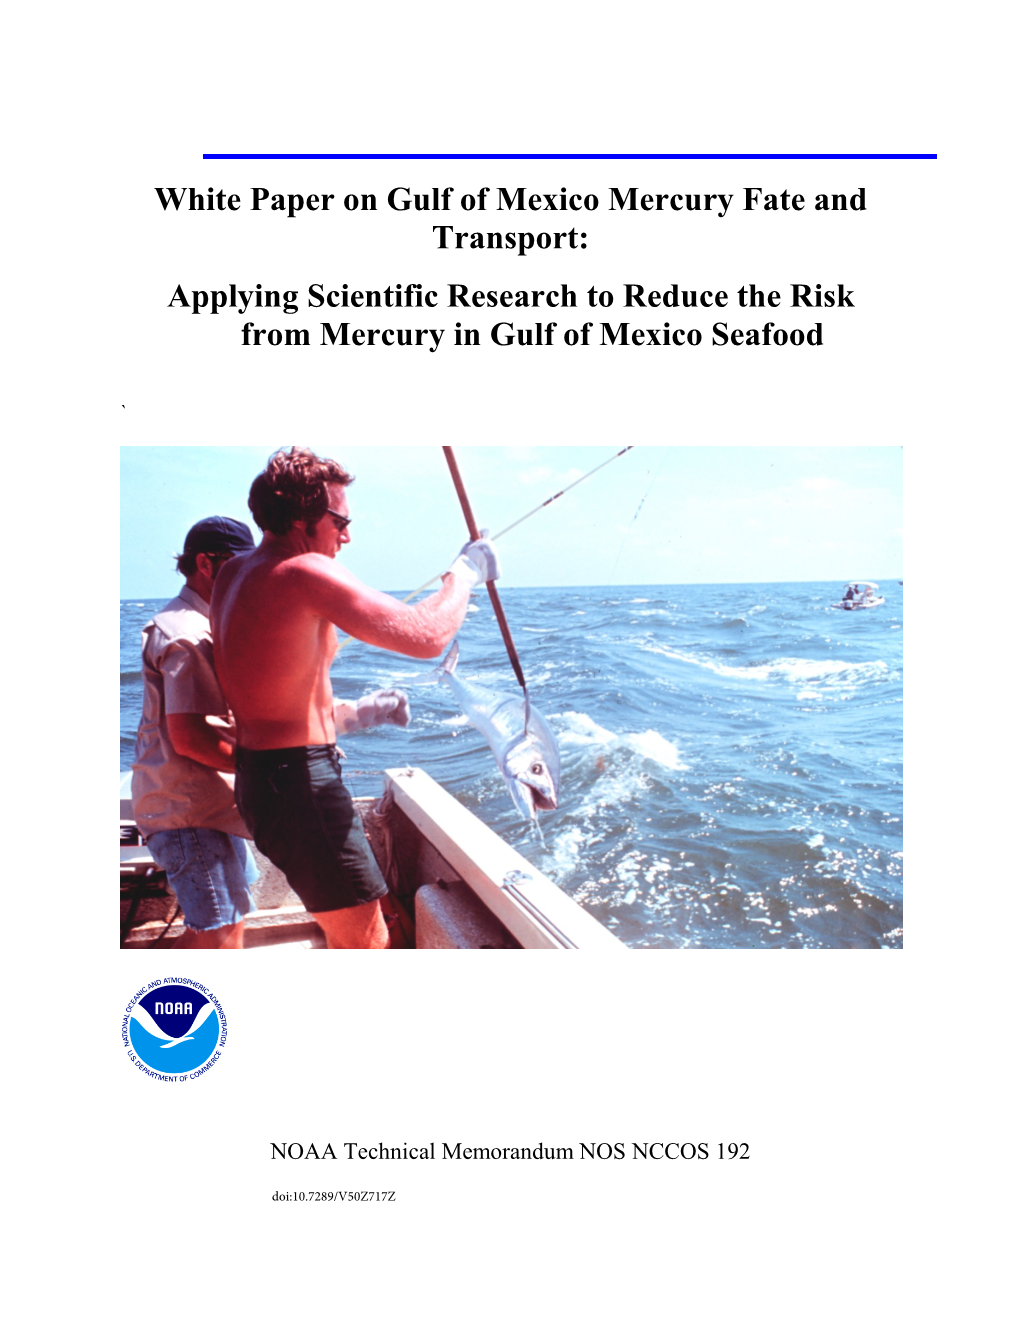 Applying Scientific Research to Reduce the Risk from Mercury in Gulf of Mexico Seafood